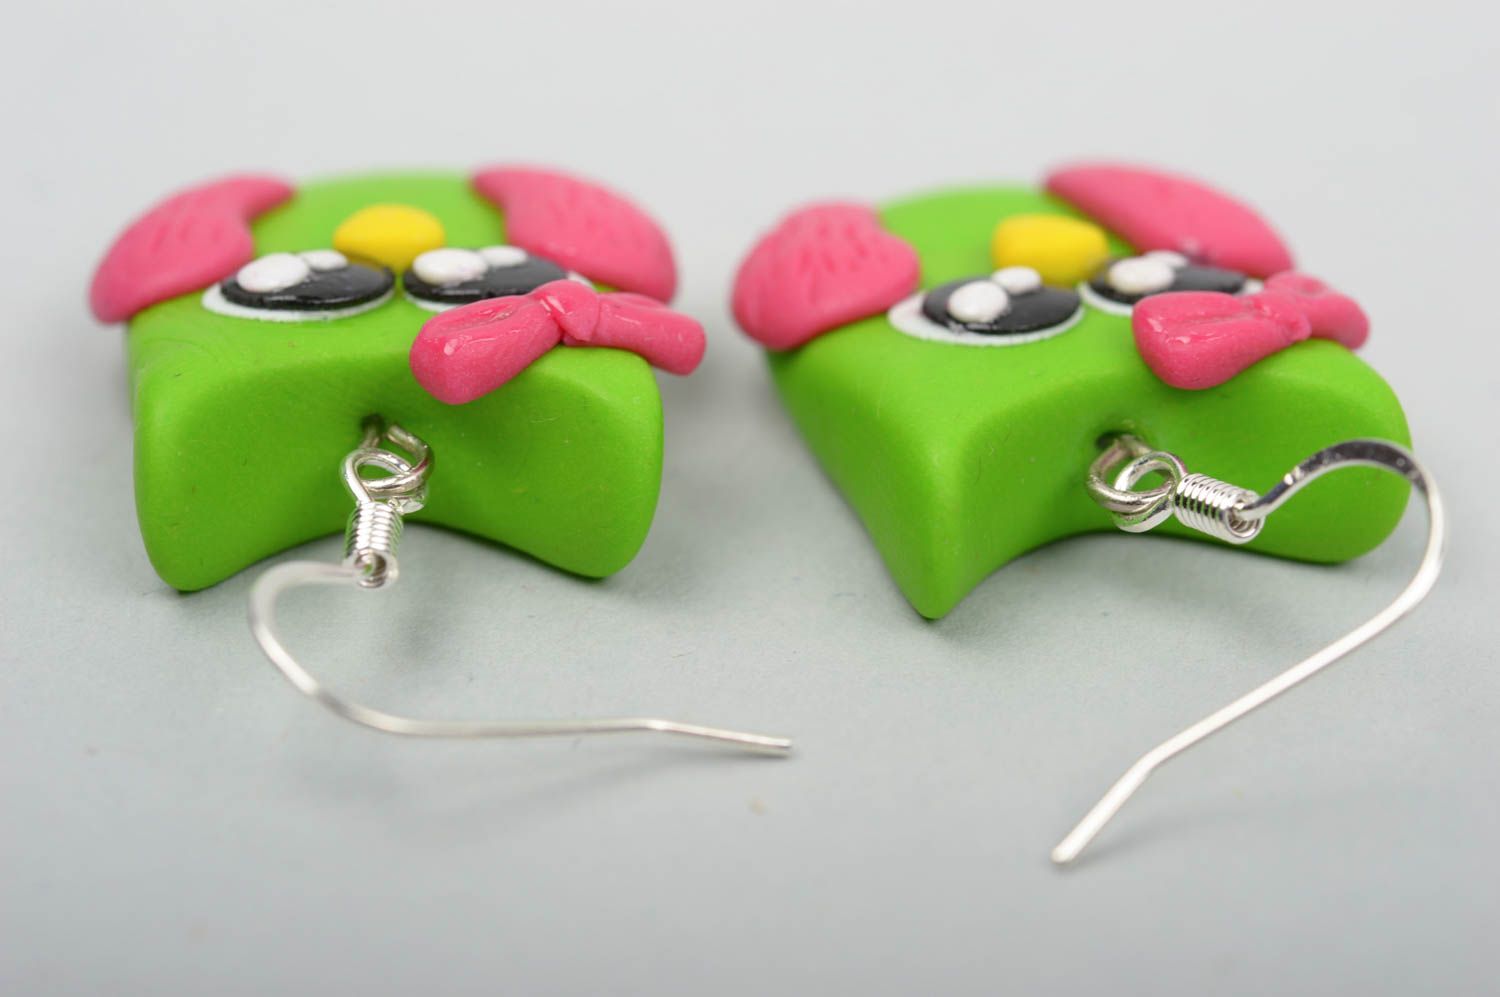 Fashion earrings handmade jewelry plastic earrings polymer clay gifts for girl photo 2